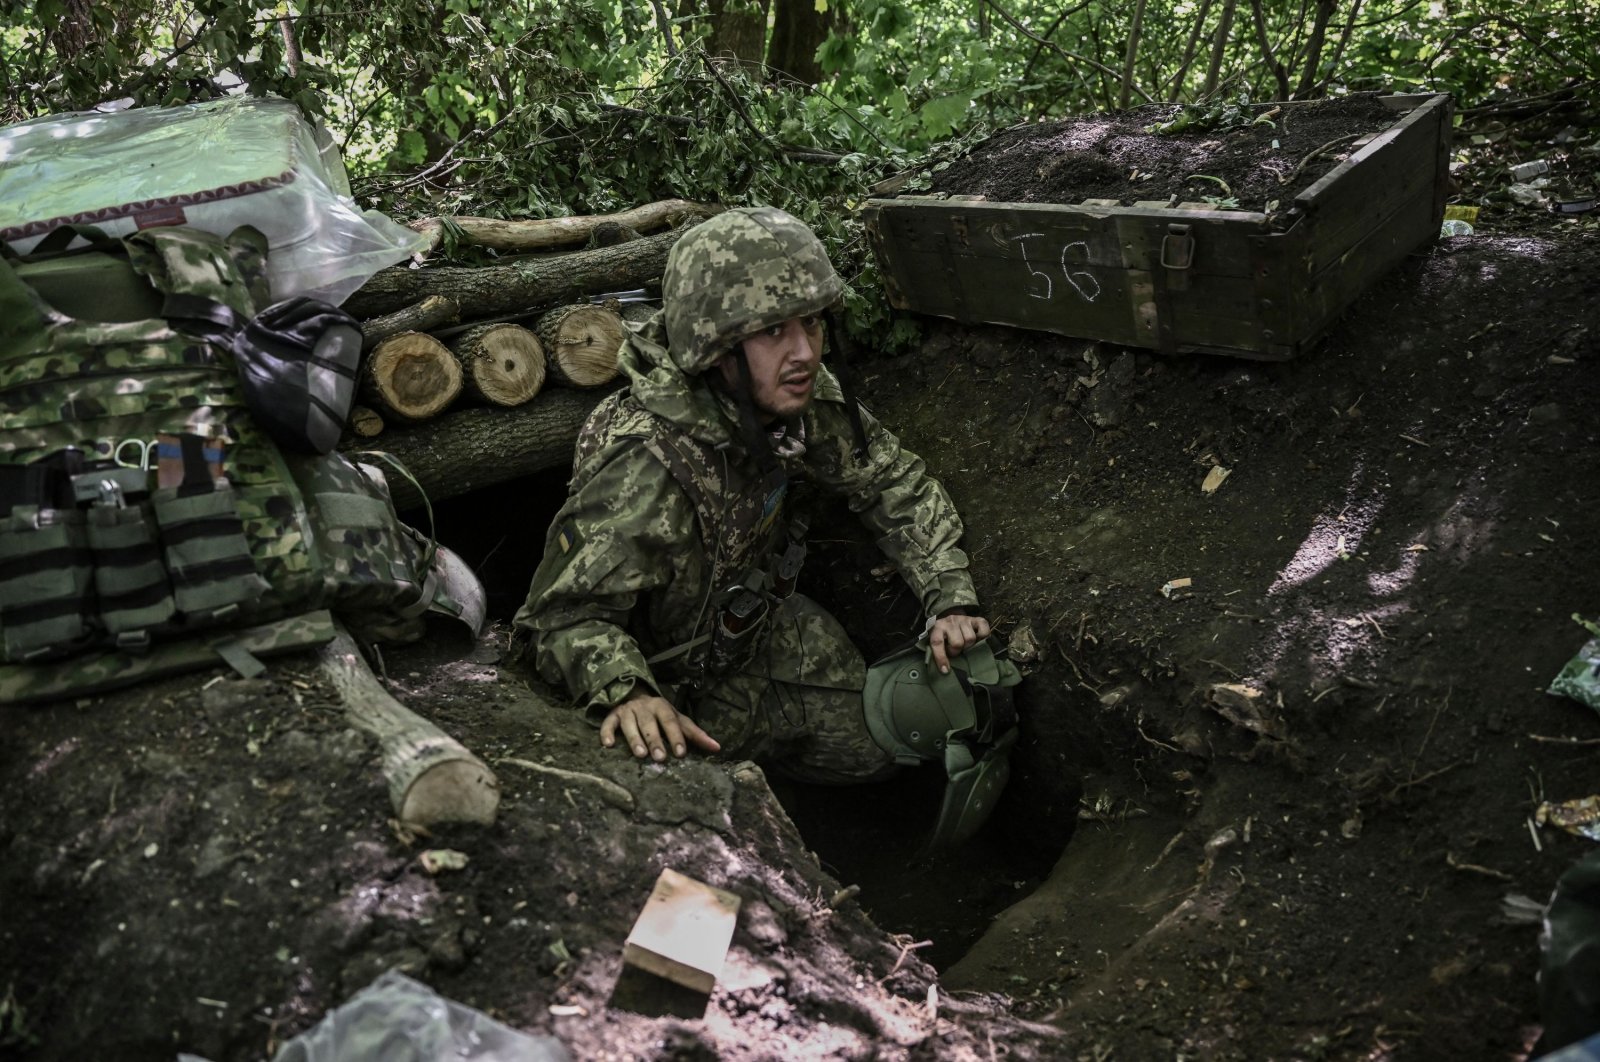 A Ukrainian serviceman gets out of an underground makeshift bunker after shelling at a field camp near the front line at an undisclosed location in the eastern region of Donbass, Ukraine, June 6, 2022. (AFP Photo)